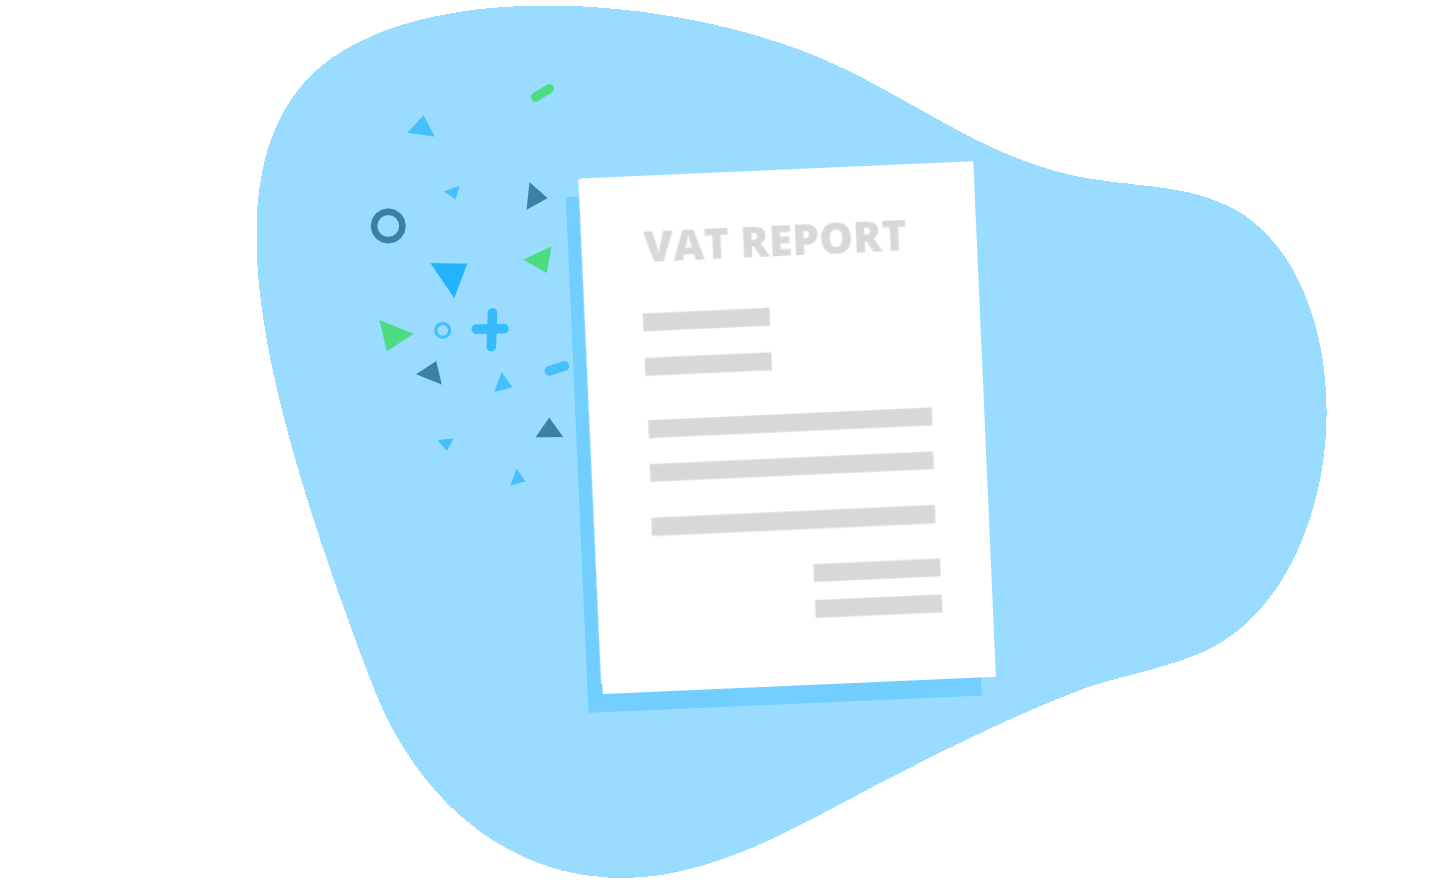 Create and send your VAT reports with Debitoor